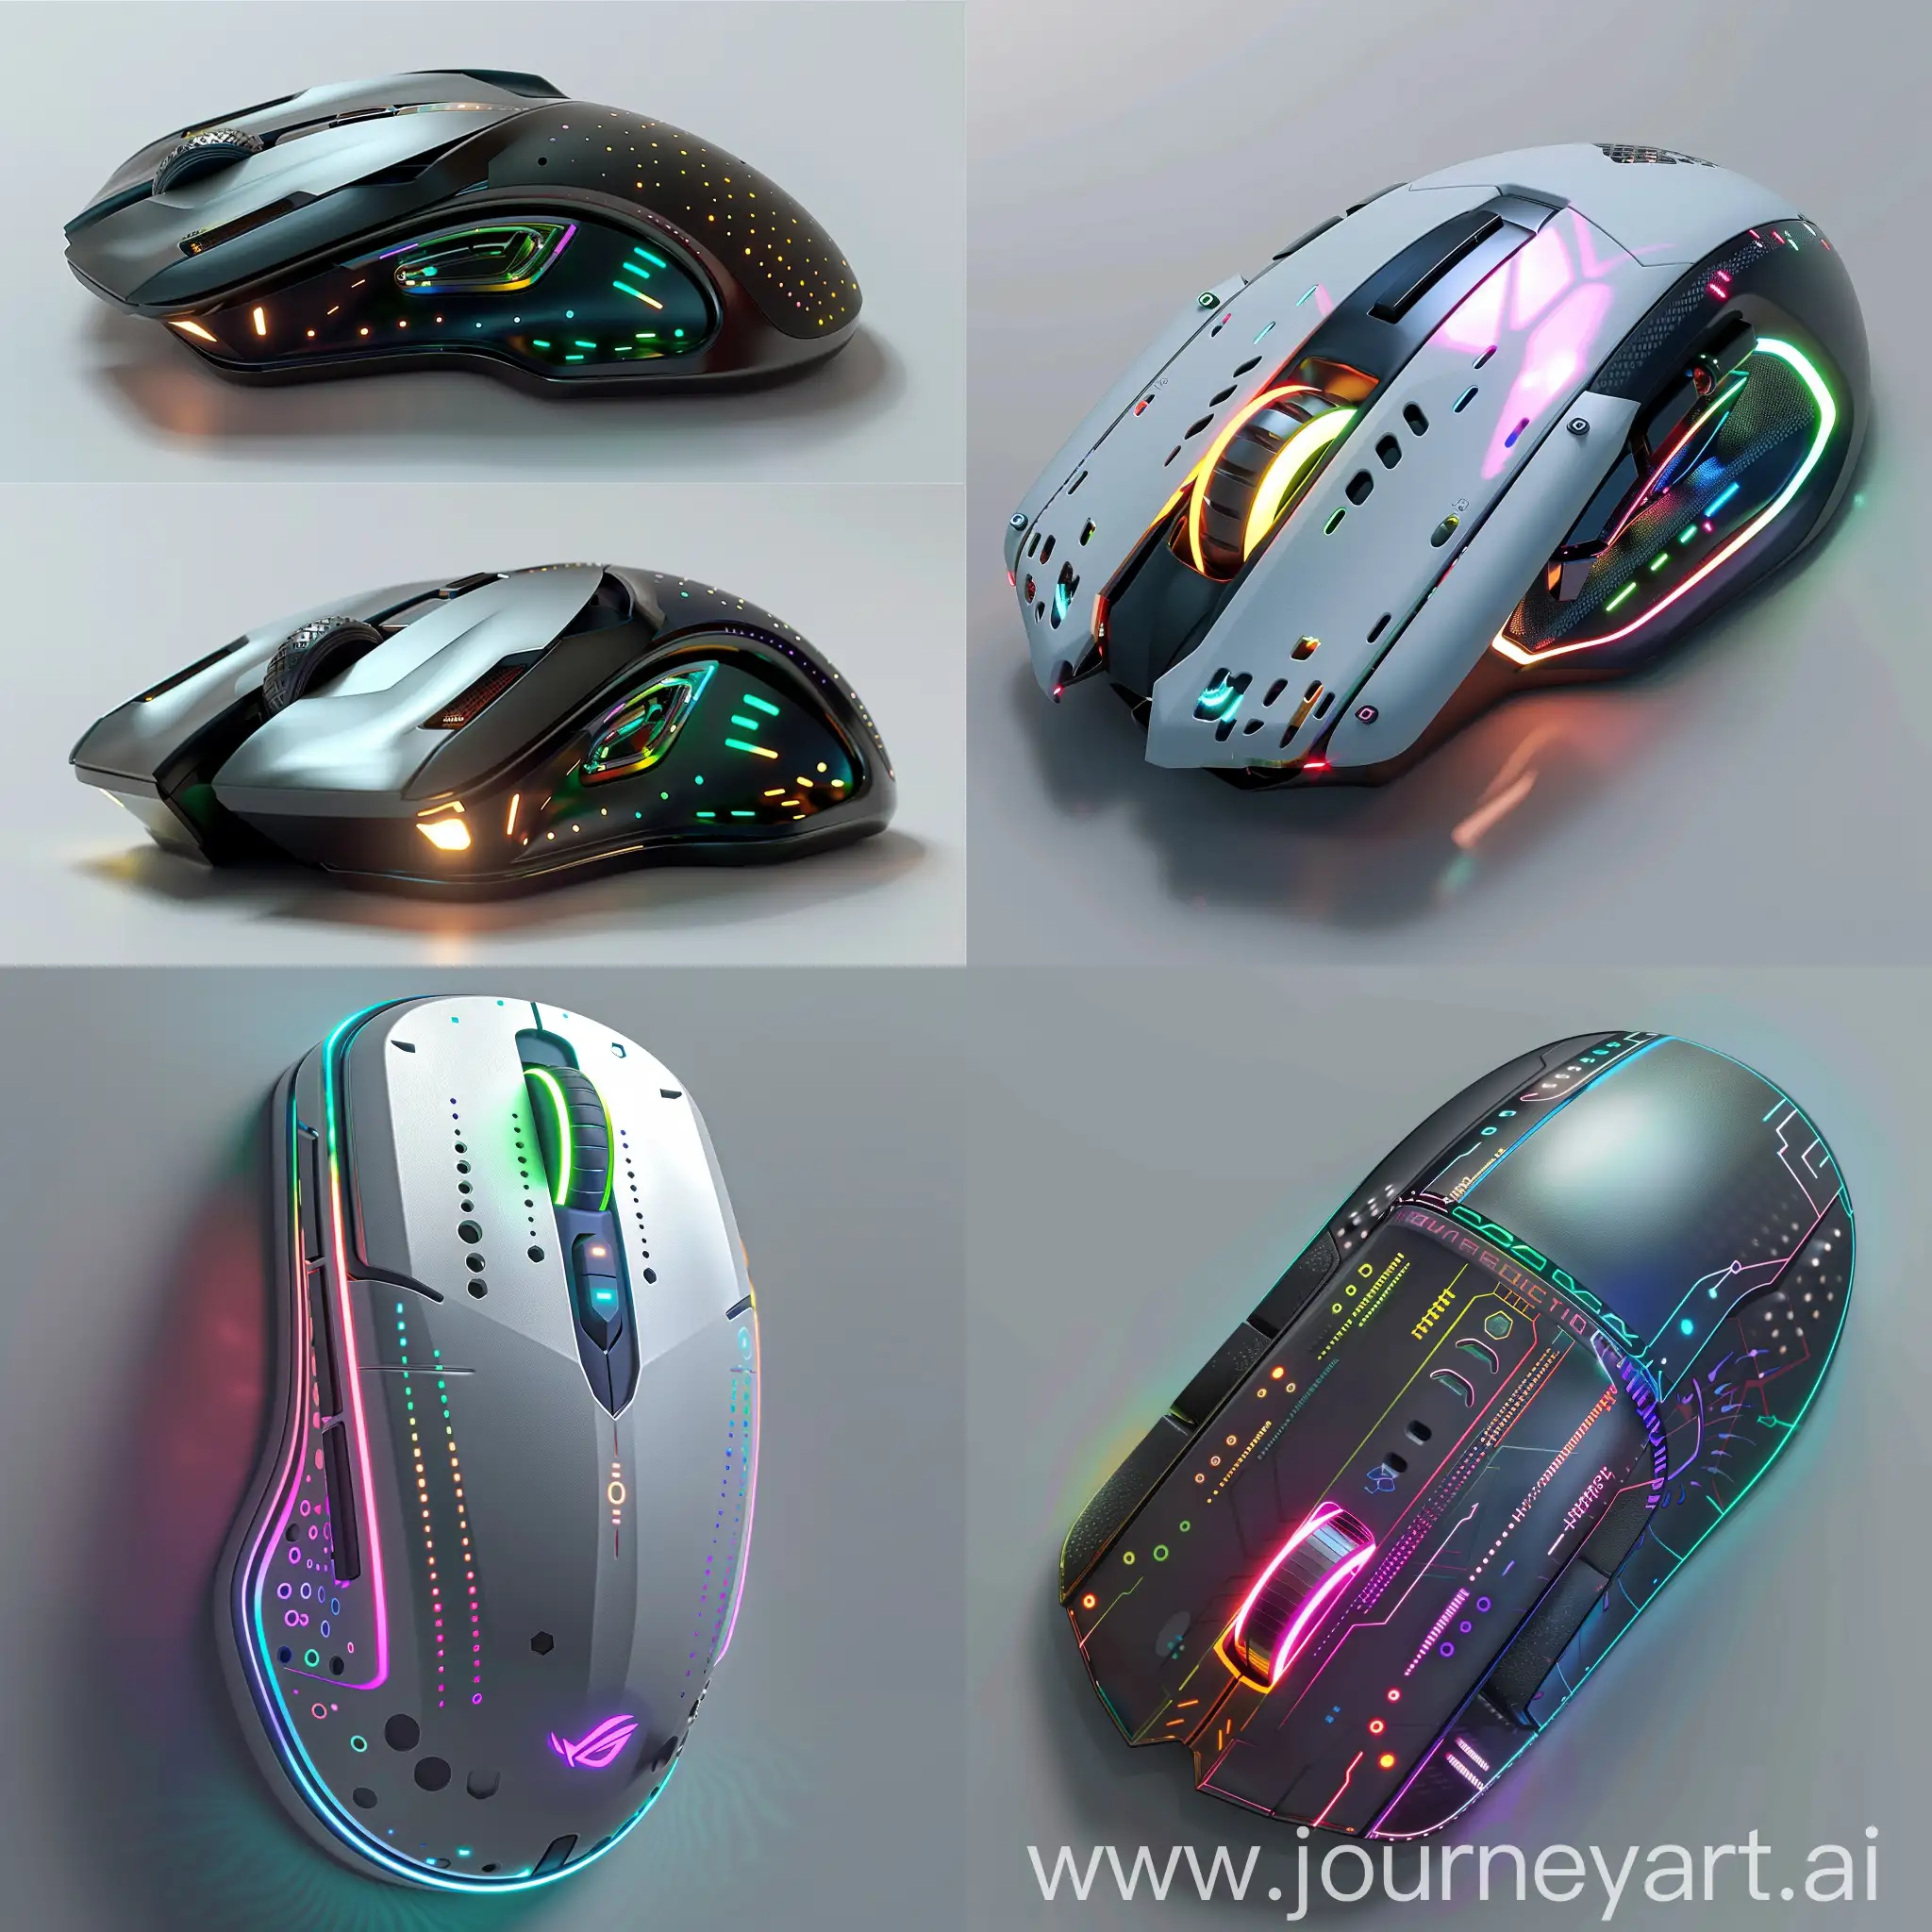 High-tech futuristic PC mouse, Adaptive Sensor Technology, Haptic Feedback Mechanism, Wireless Charging Module, Integrated AI Processor, Multifunctional Buttons, Ergonomic Shape Memory Components, RGB Lighting with Dynamic Effects, High-Durability Switches, Low-Latency Wireless Connectivity, Integrated Trackball or Touchpad, Nanoscale Sensors, Self-Healing Materials, Nanotube Enhanced Conductors, Molecular-Level Haptic Actuators, Nanoparticle Coatings, Advanced Energy Harvesting, Supercapacitors with Nanomaterials, Quantum Dot Display Indicators, Nano-Optomechanical Systems (NOMS), Microfluidic Cooling Systems, Ergonomic Contour Design, Customizable RGB Lighting, Touch-Sensitive Controls, High-Precision Scroll Wheel, Premium Material Finish, Magnetic Docking System, Interchangeable Side Panels, Ambidextrous Design, OLED Display, Anti-Slip Coating, Self-Cleaning Surface, Adaptive Surface Texture, Nano-Patterned Grip, Ultra-Thin Flexible Display, Photochromic Coating, Biometric Sensors, Temperature-Regulating Surface, Nano-Embedded Antimicrobial Coating, Transparent Nano-Composite Shell, Embedded Solar Cells, unreal engine 5 --stylize 1000